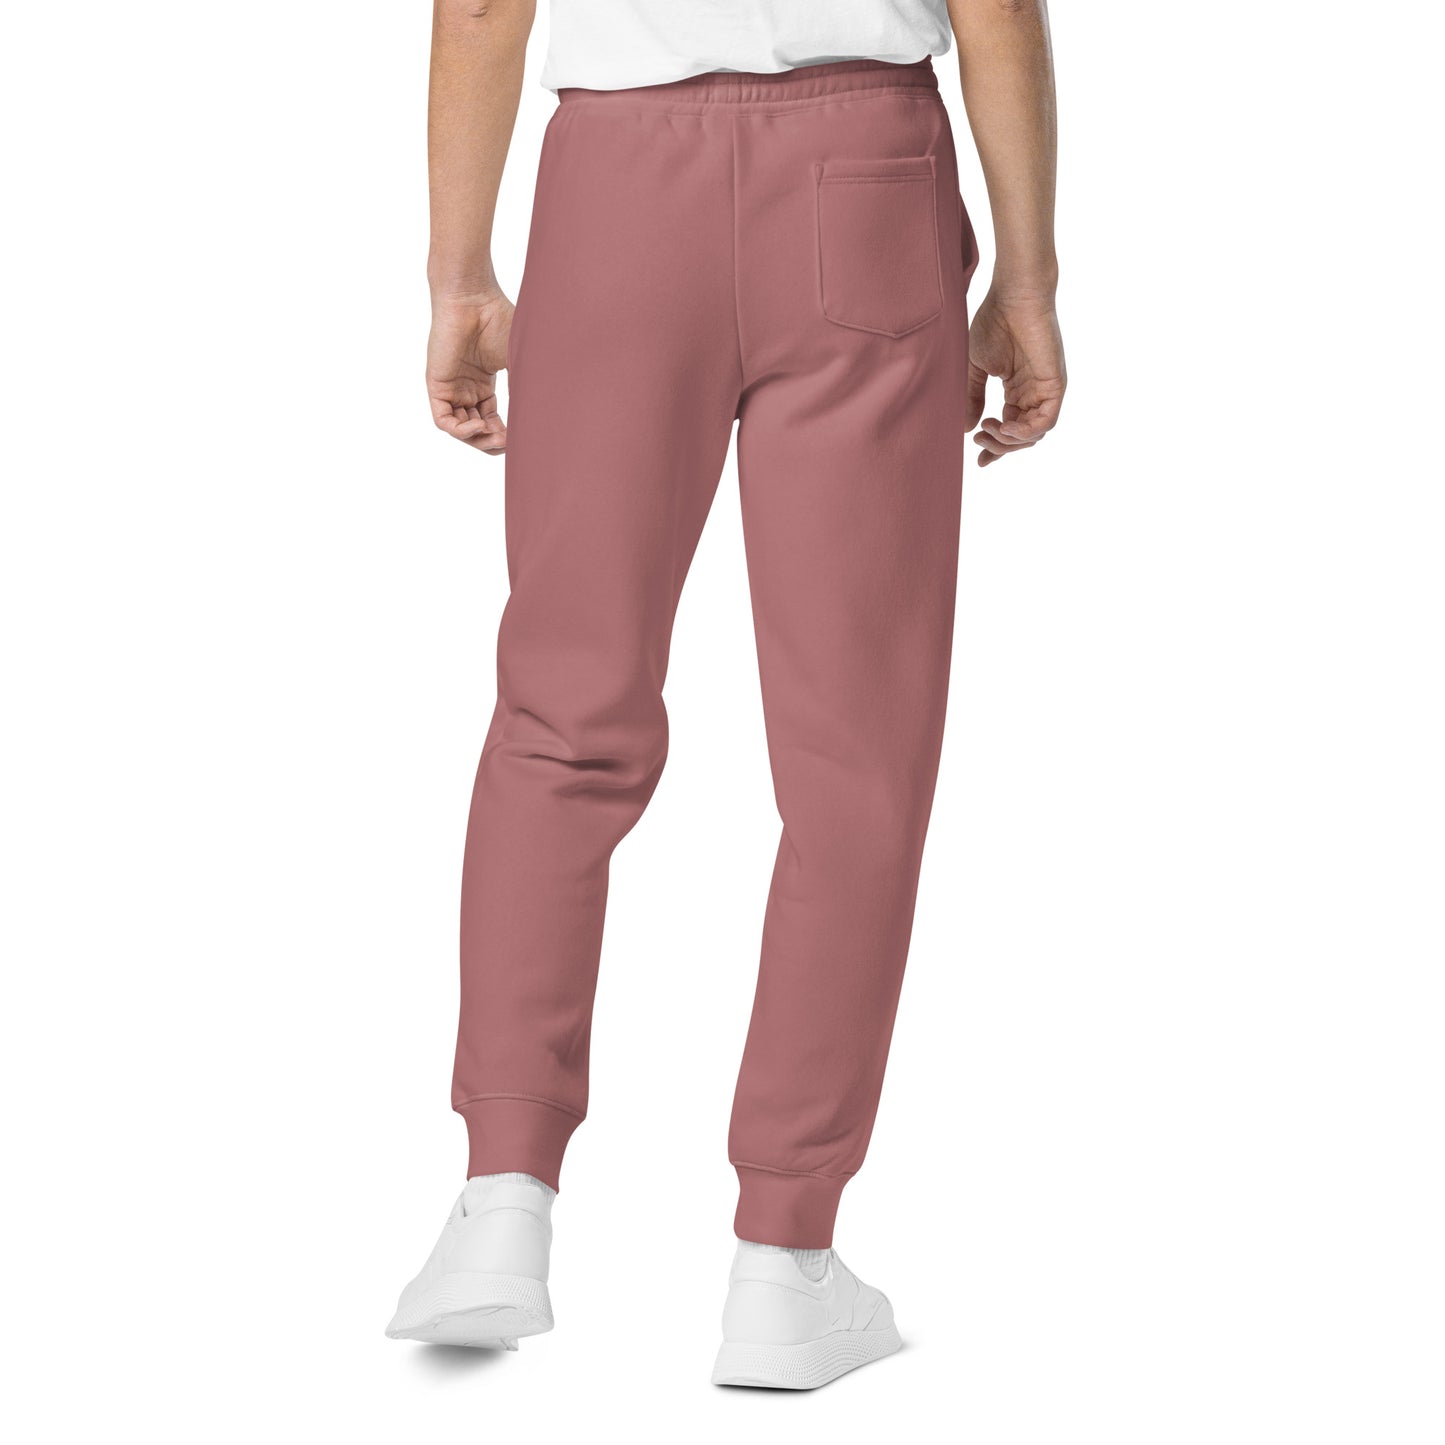 Rizzly Bear pigment-dyed sweatpants